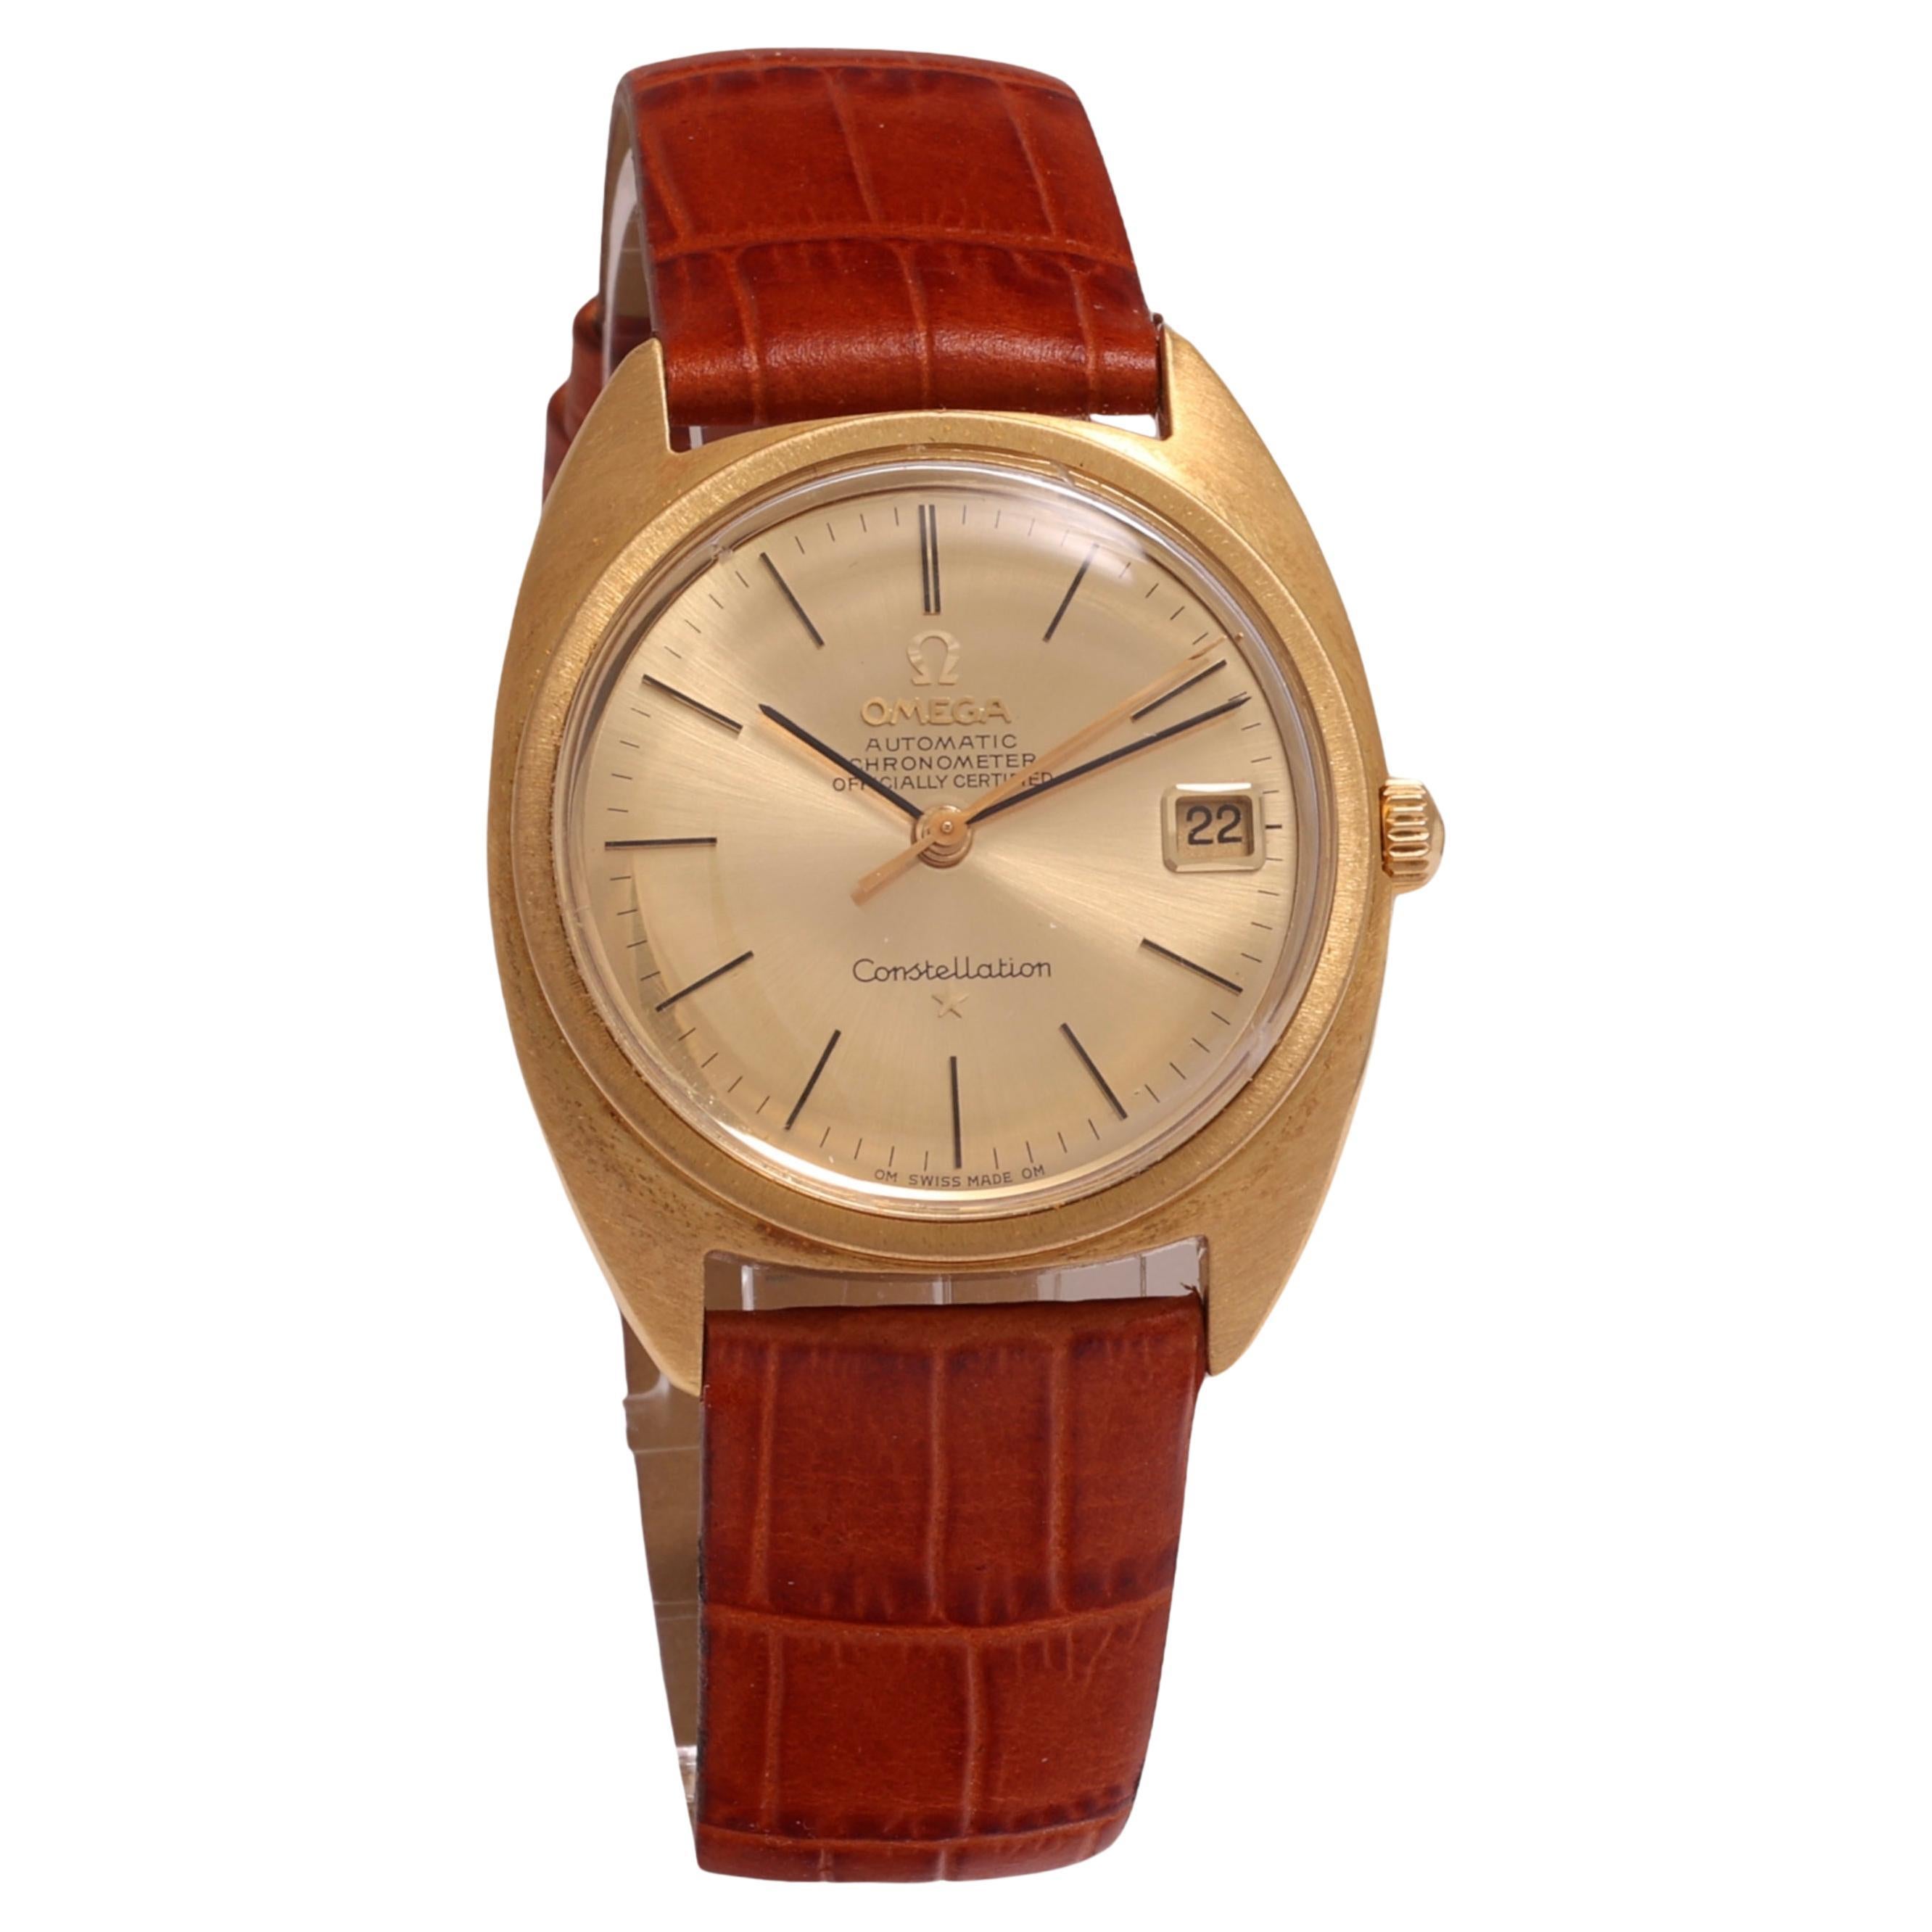 Omega Constellation Automatic Wristwatch, Cal.564, 35 mm, Ref 168.009 168.017 For Sale